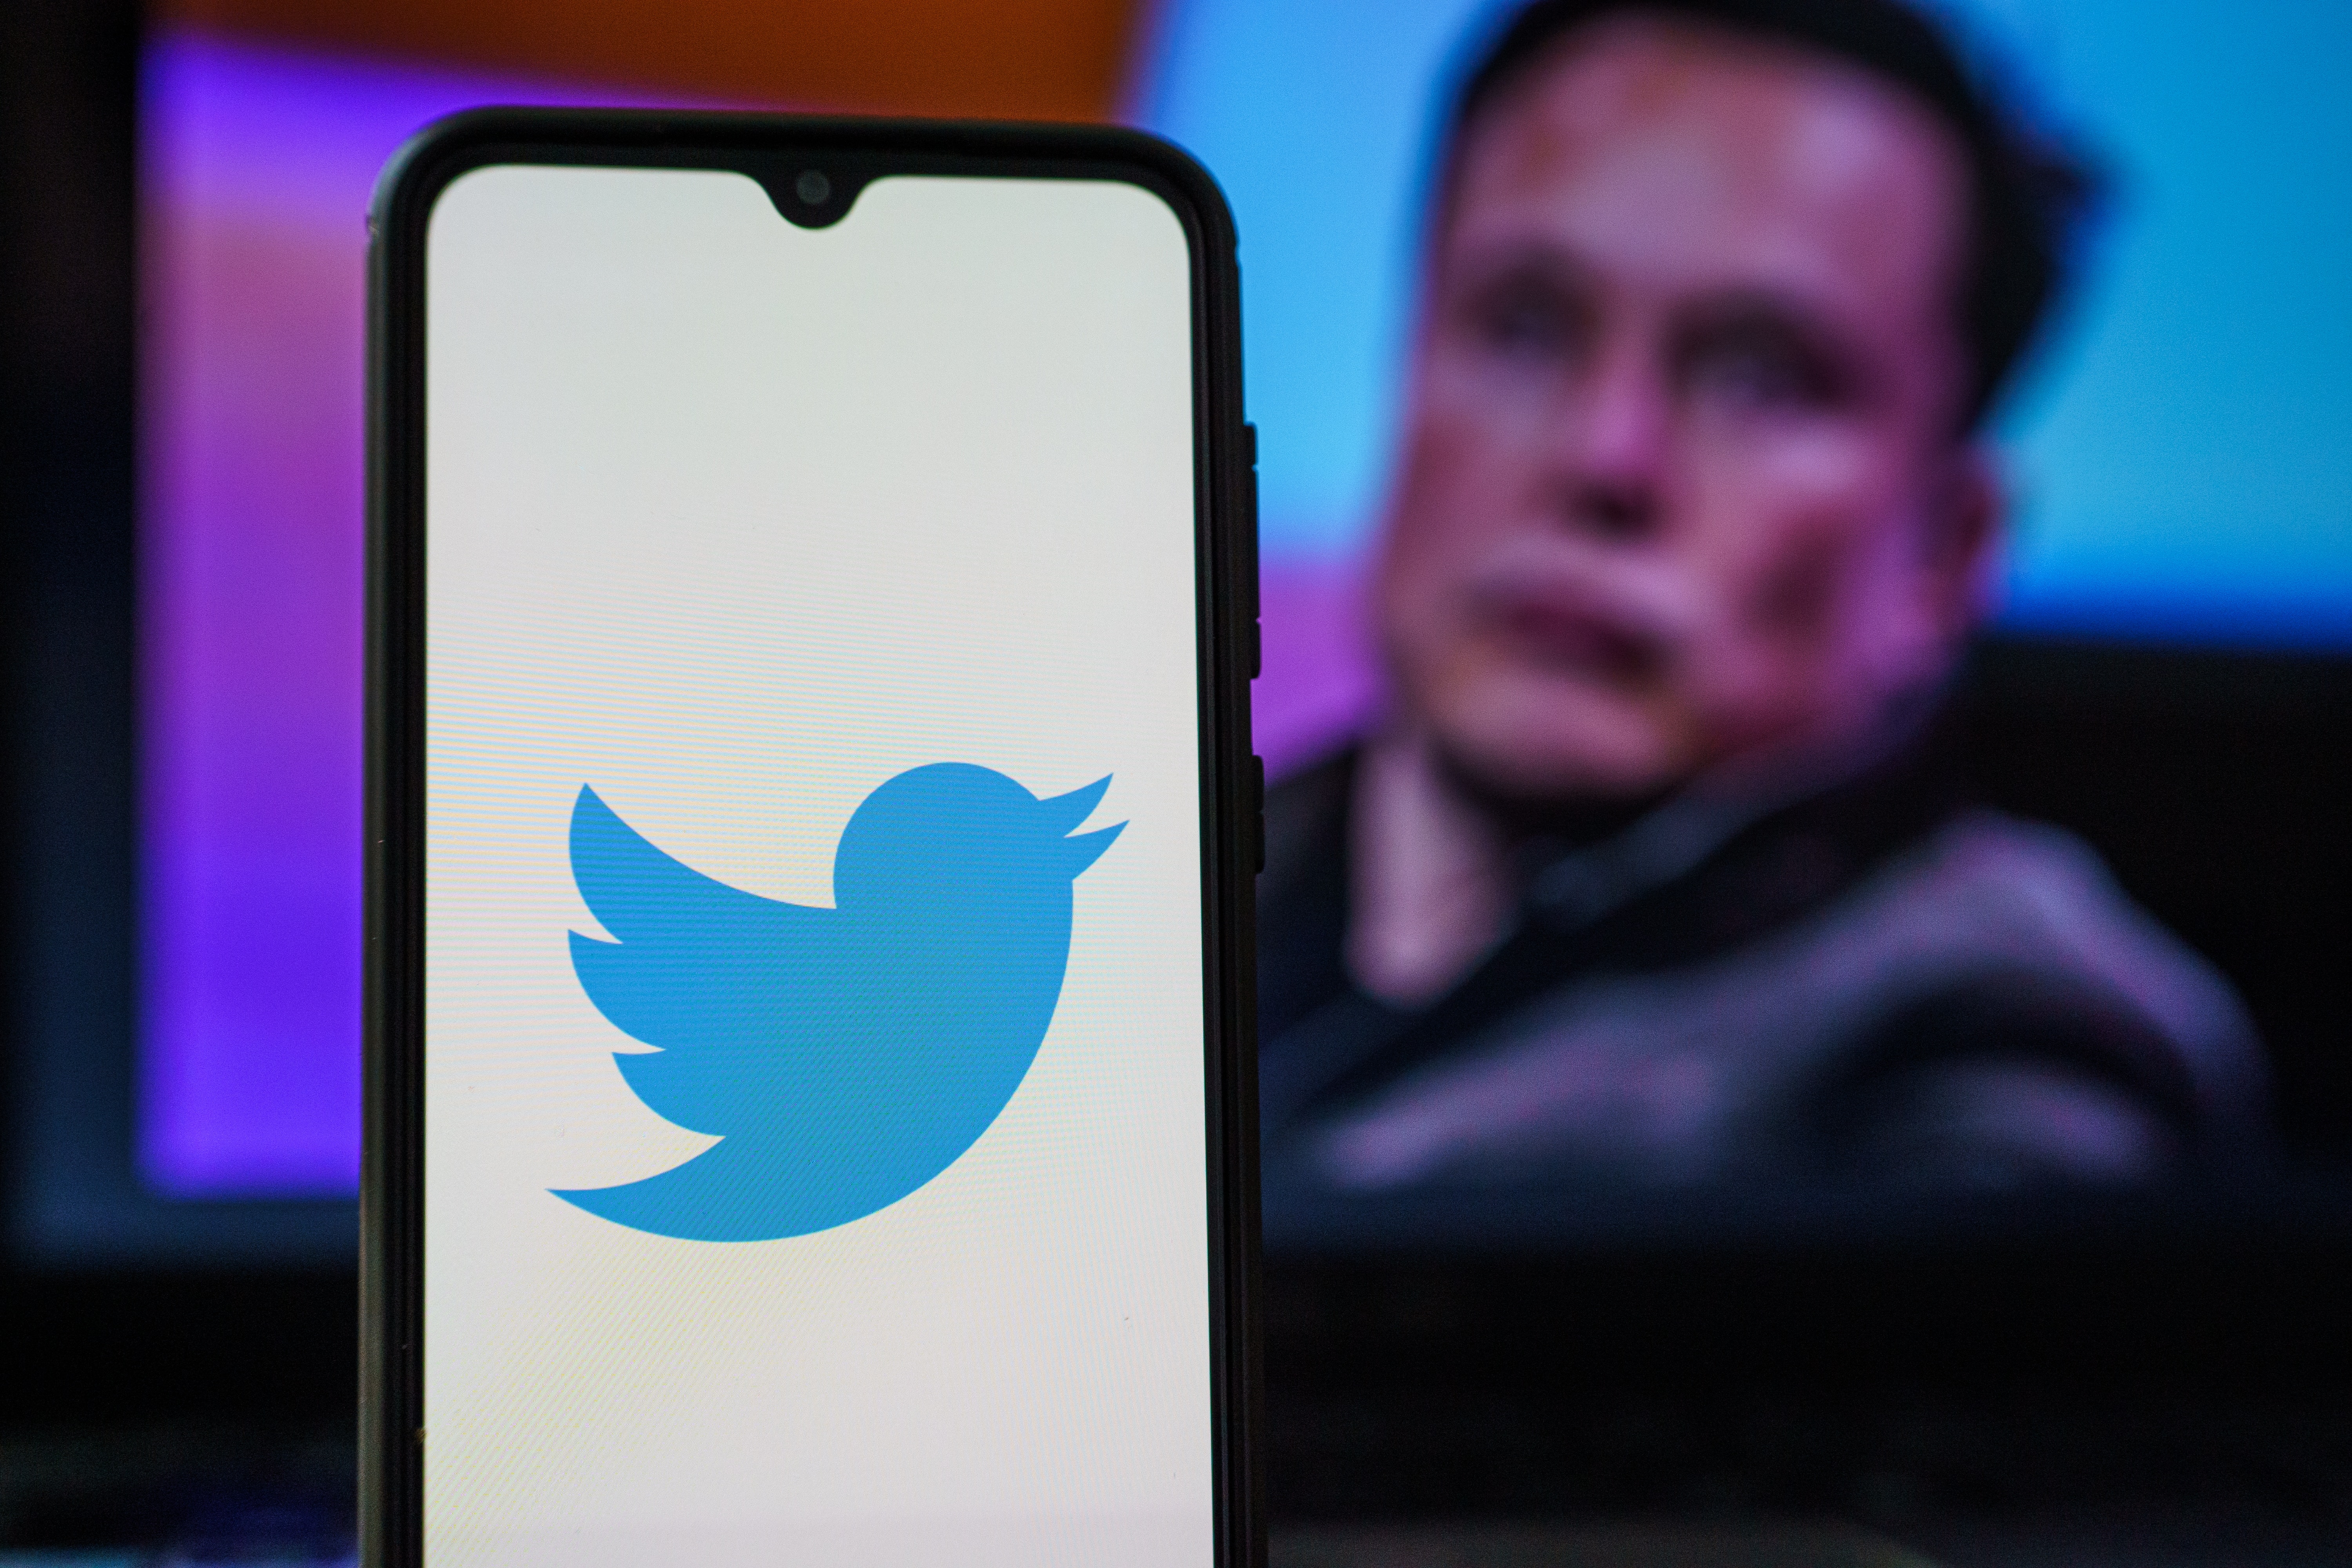 Is Elon Musk Taking His Own Advice? Why Rescinding His Twitter Deal May Mean More Than You Think